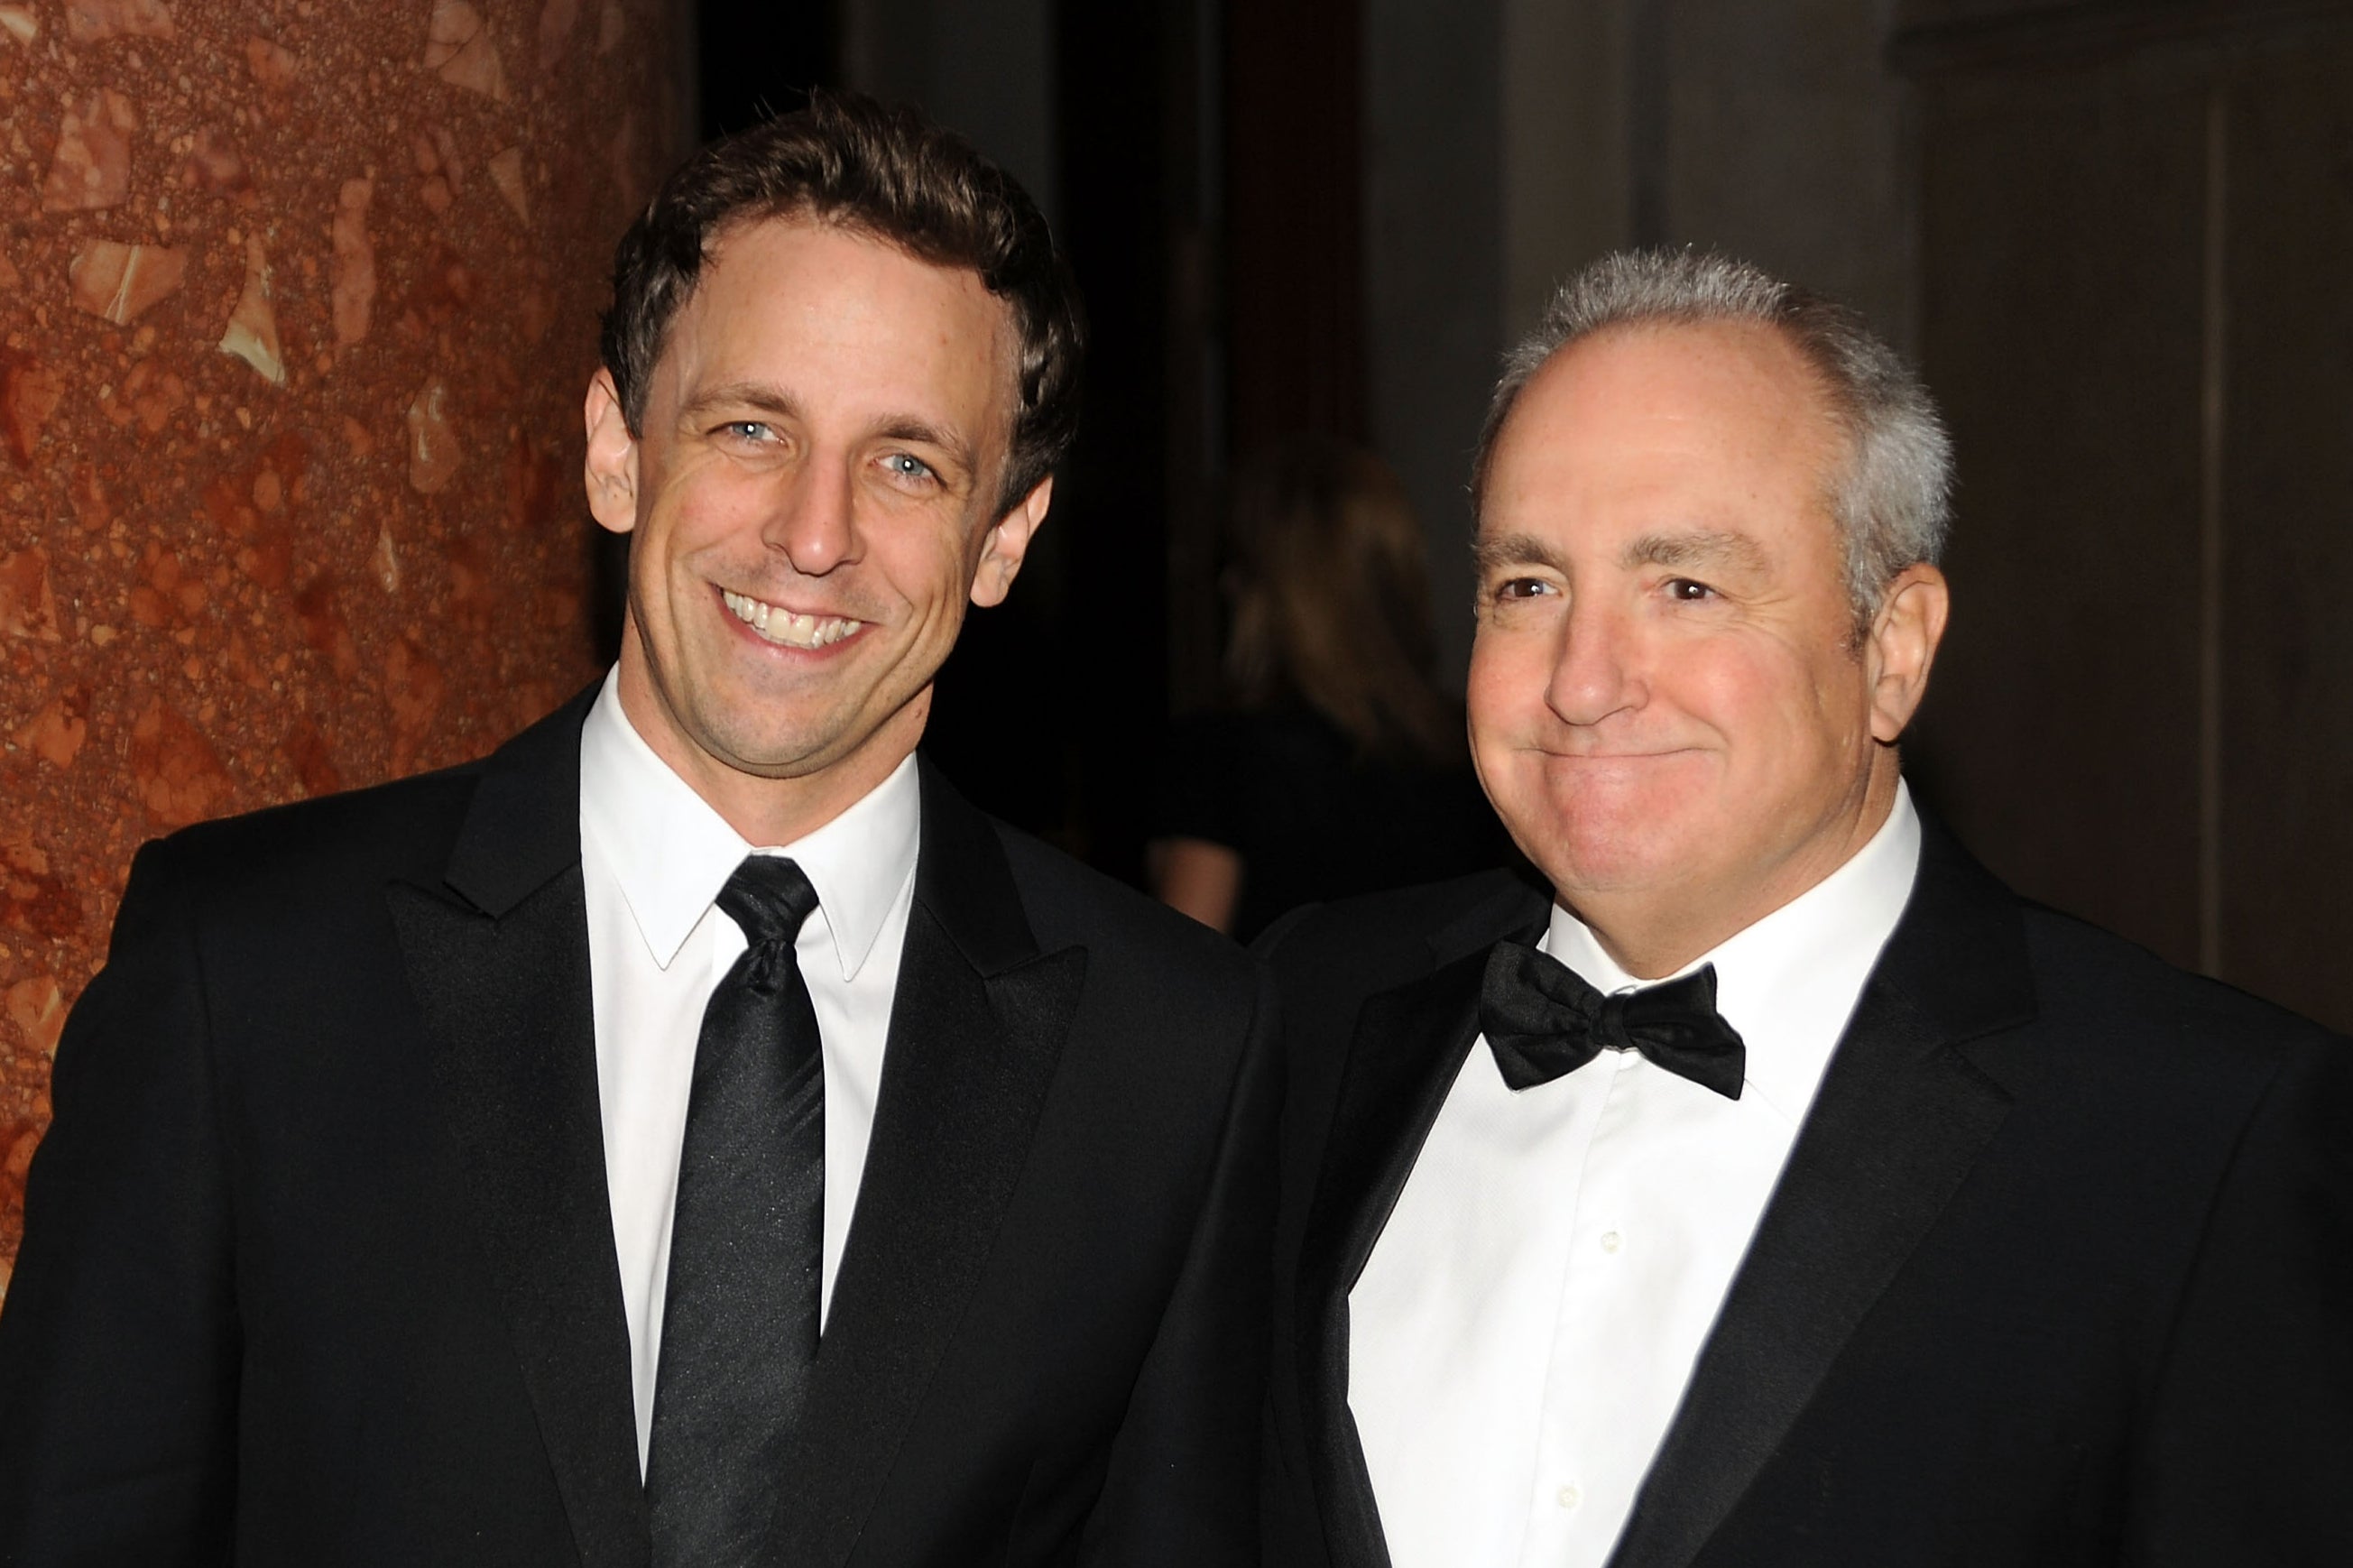 Seth Meyers and Lorne Michaels in 2009